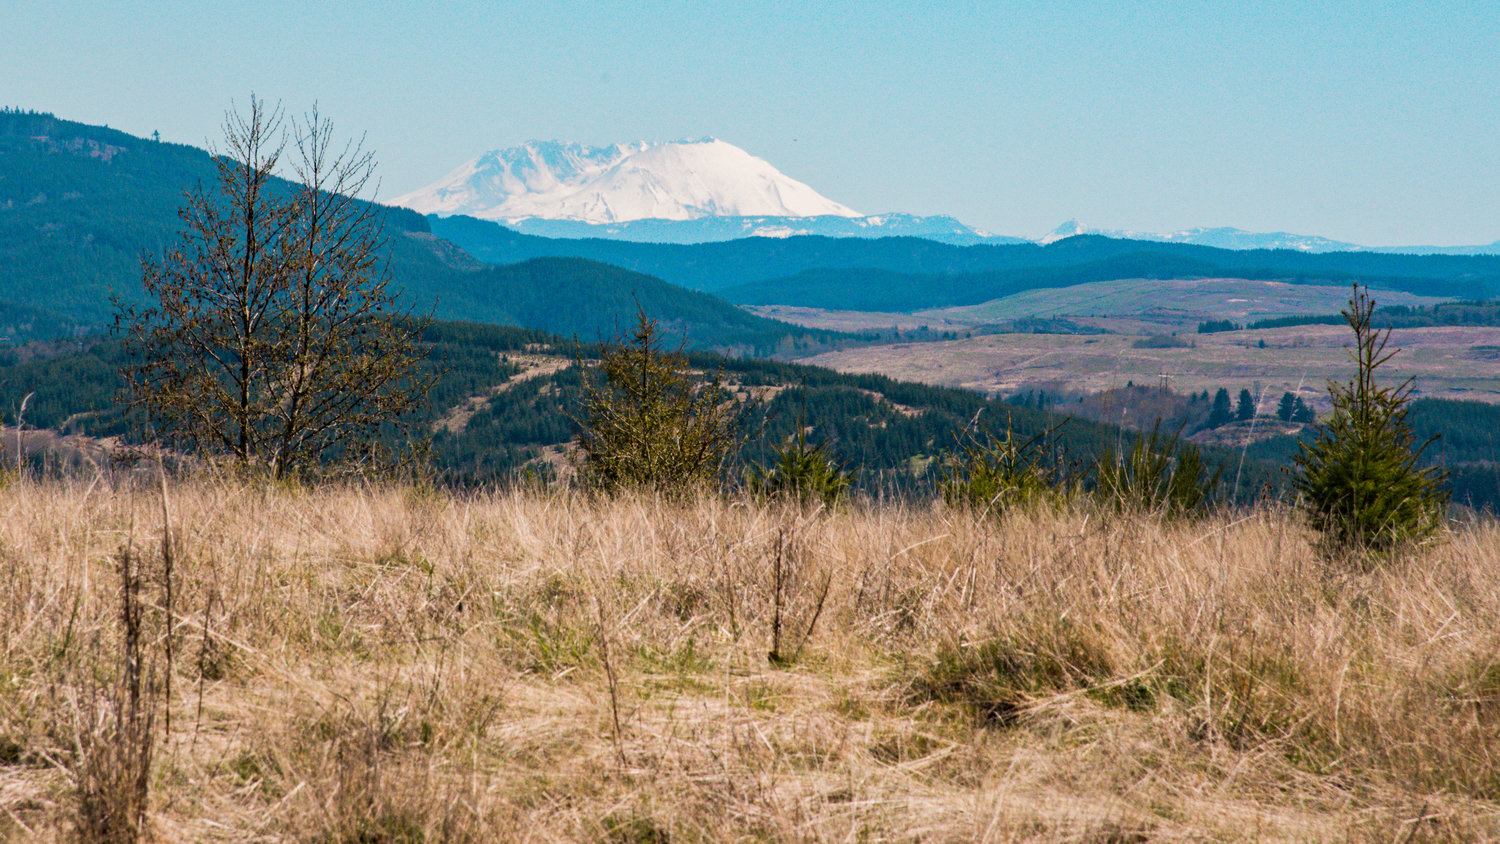 Mount St. Helens sets the backdrop looking over TransAlta Centralia property earlier this year.